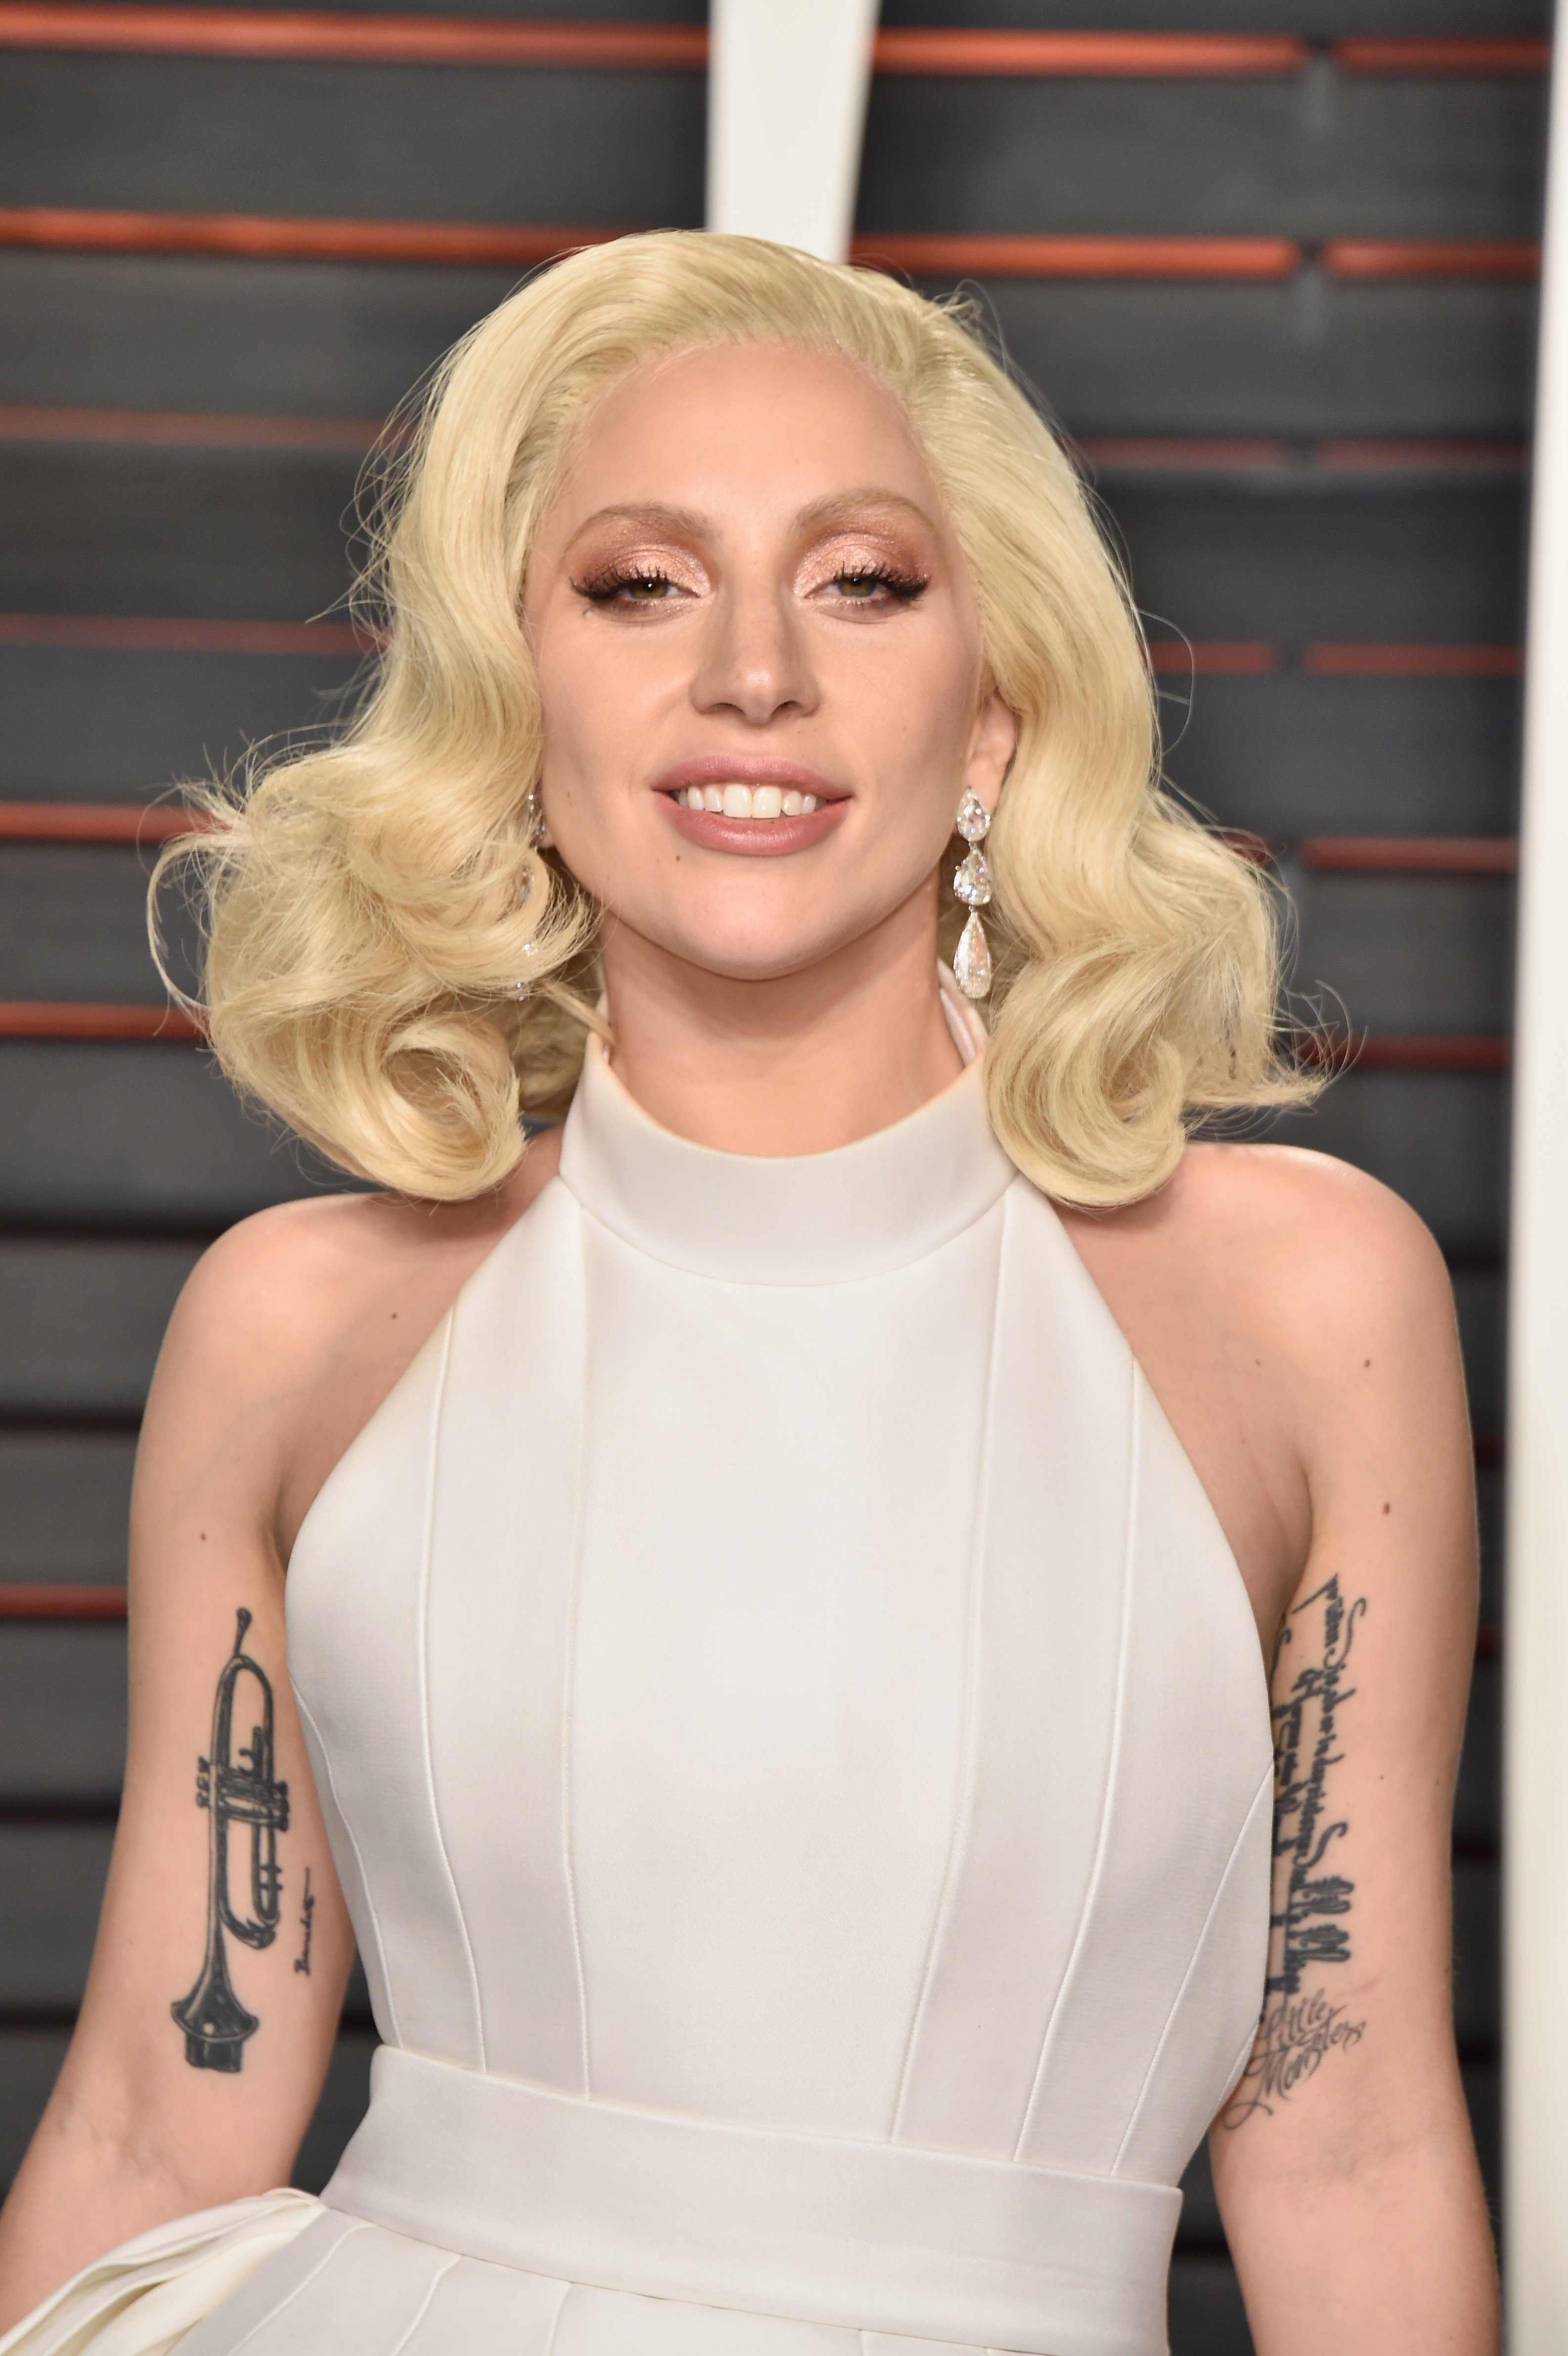 Lady Gaga attends the 2016 Vanity Fair Oscar Party on February 28, 2016. | Photo: Getty Images